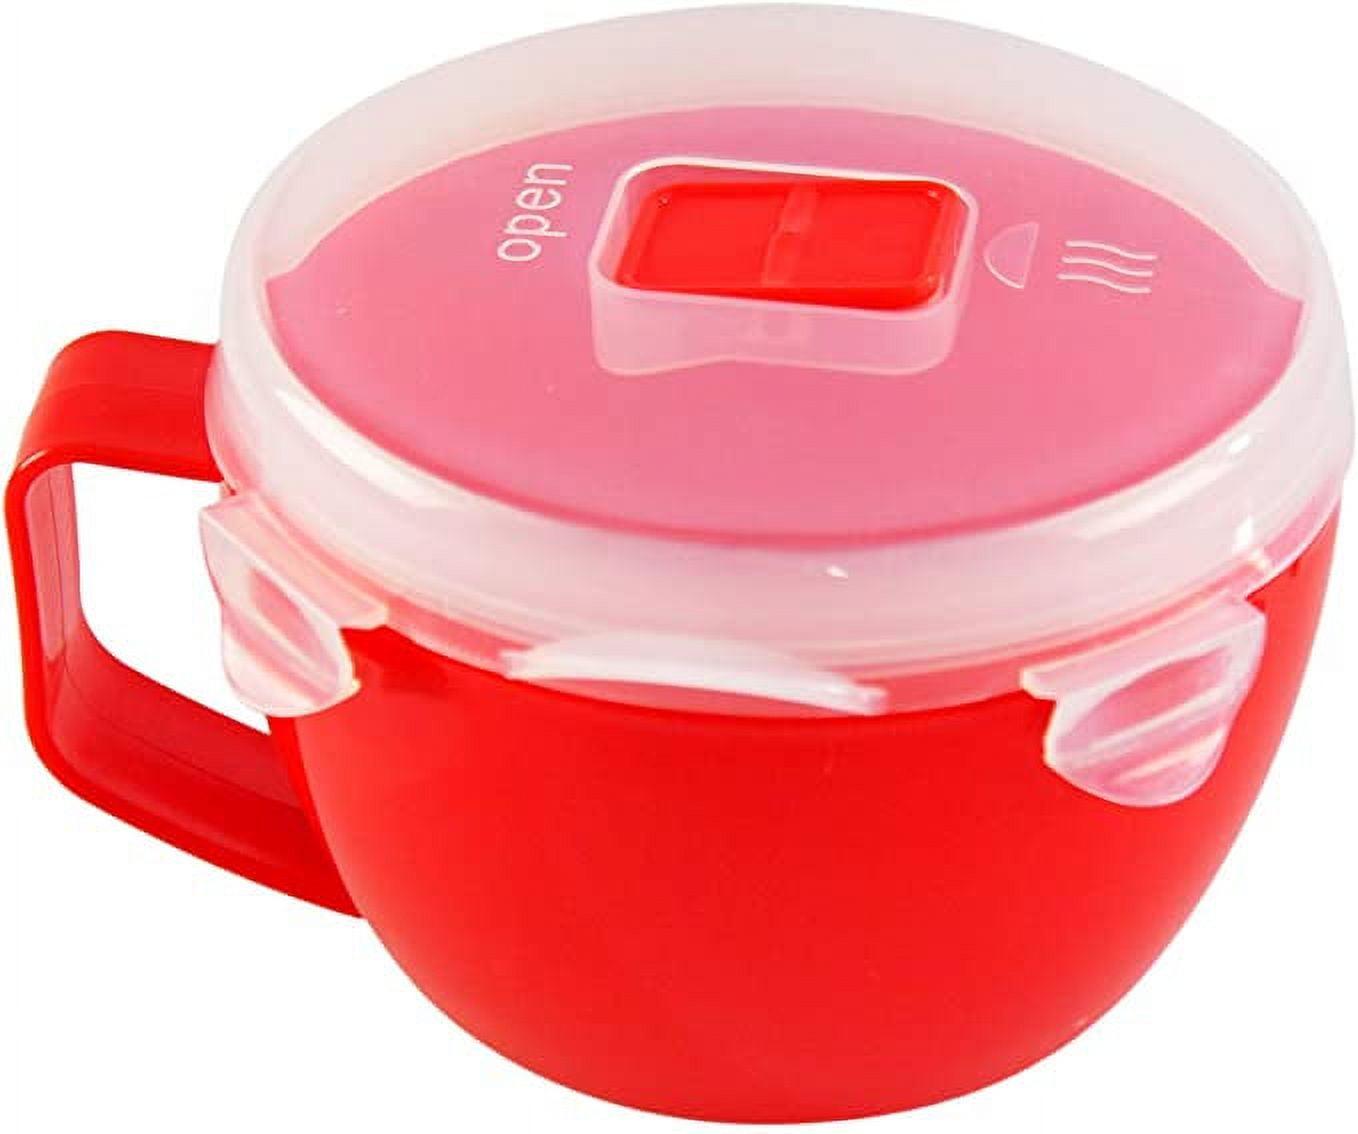 Rapid Noodle Cooker/Soup Bowl with Lid. Microwave Soup & Noodles in Minutes  (red)